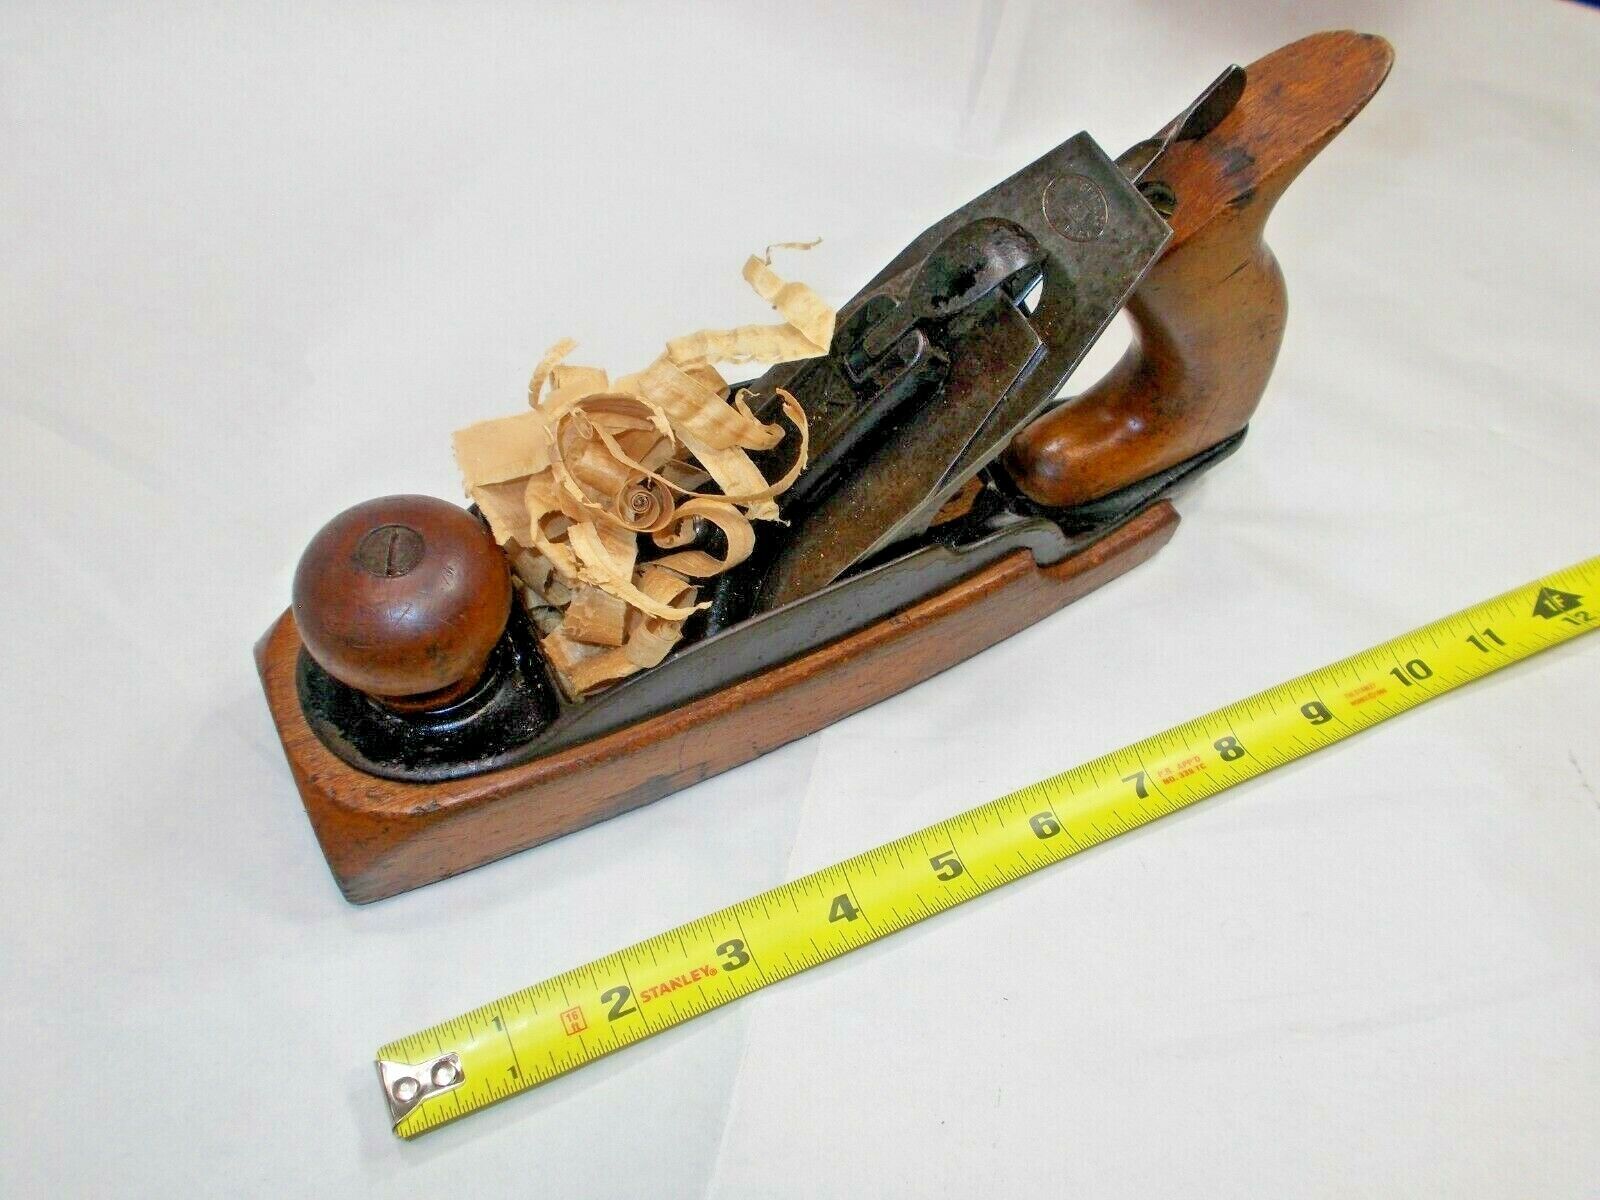 VTG Sargent V-B-M Round Cut No 3411 Woodworkers Bench Plane Pat\'d 2-3-1891, USA